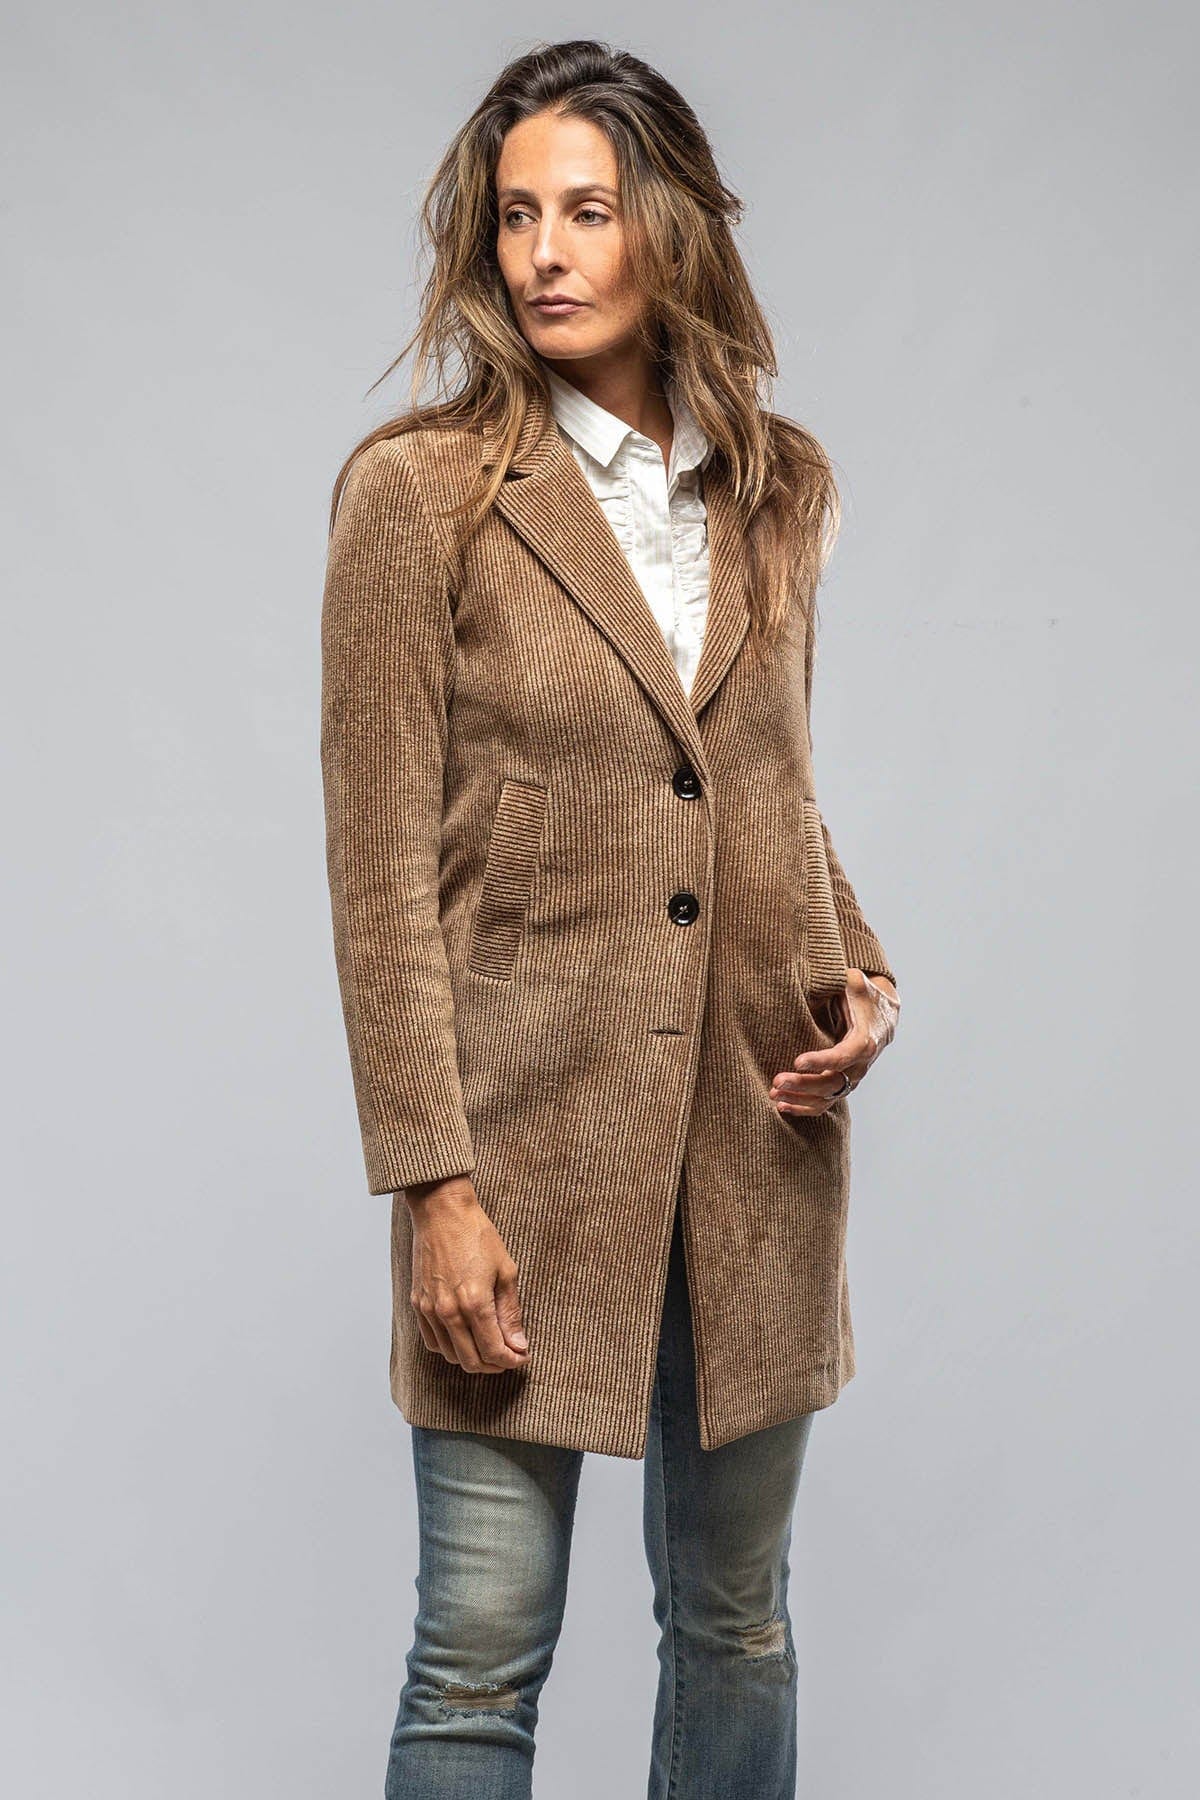 Ludovica Cord Jacket In Brown Sugar - AXEL'S